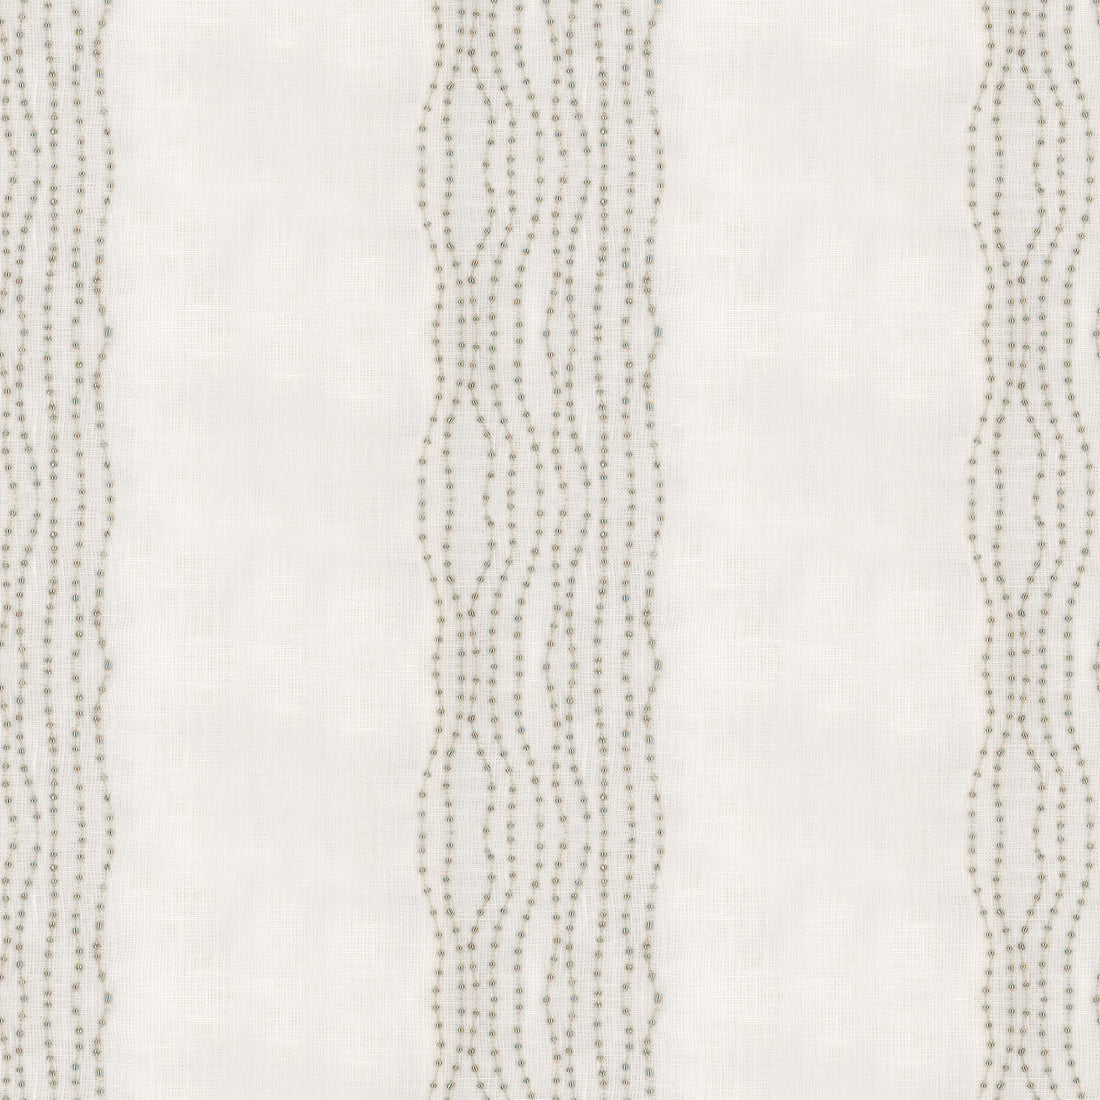 Songket fabric in lucite color - pattern 32450.101.0 - by Kravet Couture in the Calvin Klein Home collection